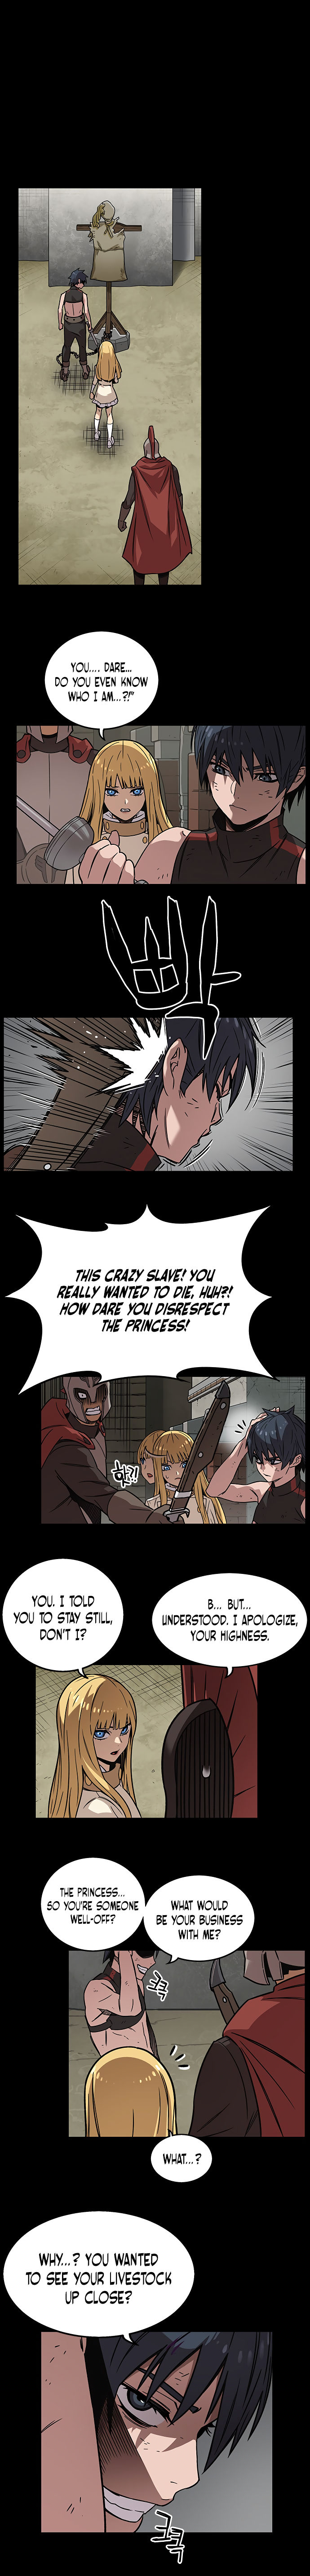 Aire - Chapter 3 Page 2